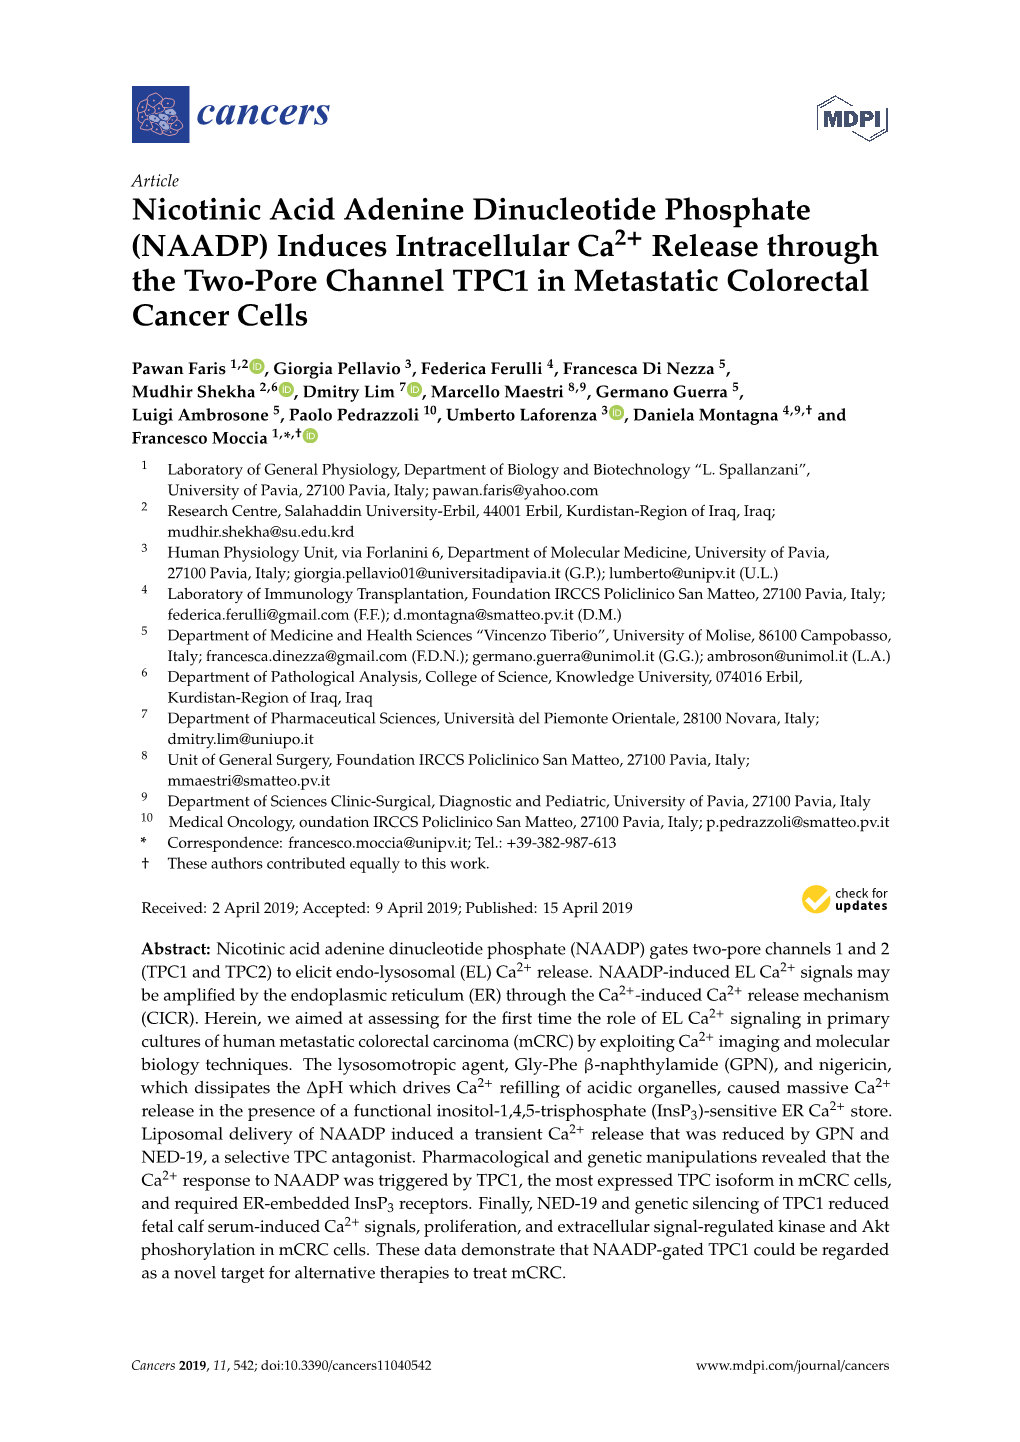 (NAADP) Induces Intracellular Ca2+ Release Through the Two-Pore Channel TPC1 in Metastatic Colorectal Cancer Cells